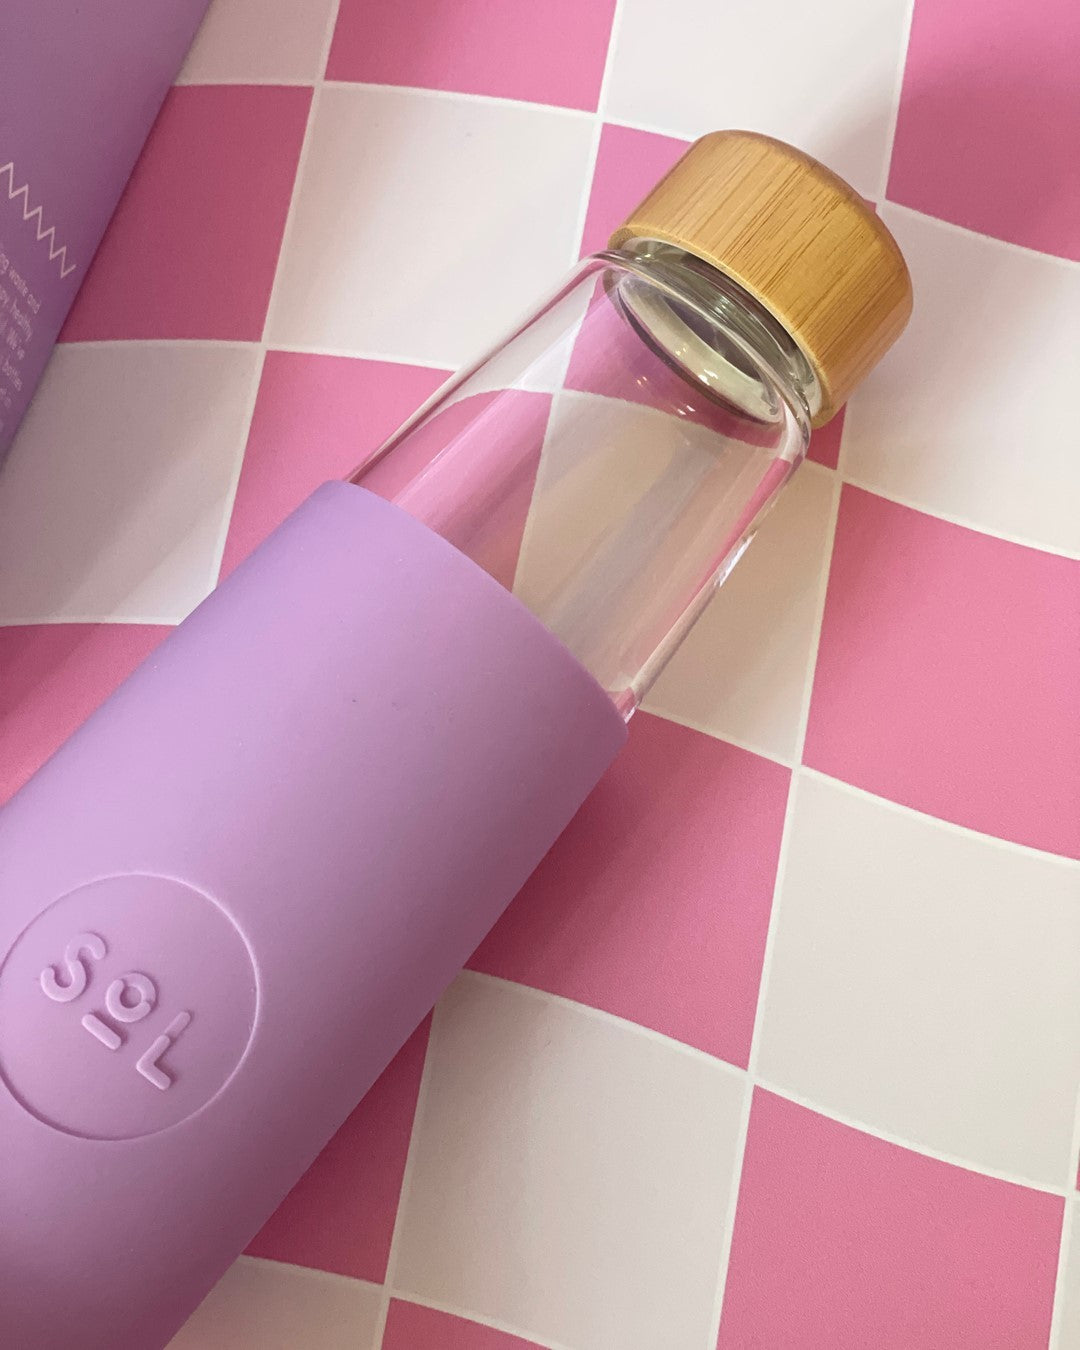 SoL Water Bottle: Enjoy the pure taste of water in a hand blown glass bottle that's reusable, easy to carry and comes in a range of sizes and colours.
Our Large beautiful SoL Bottles  - Ciao Bella Dresses 